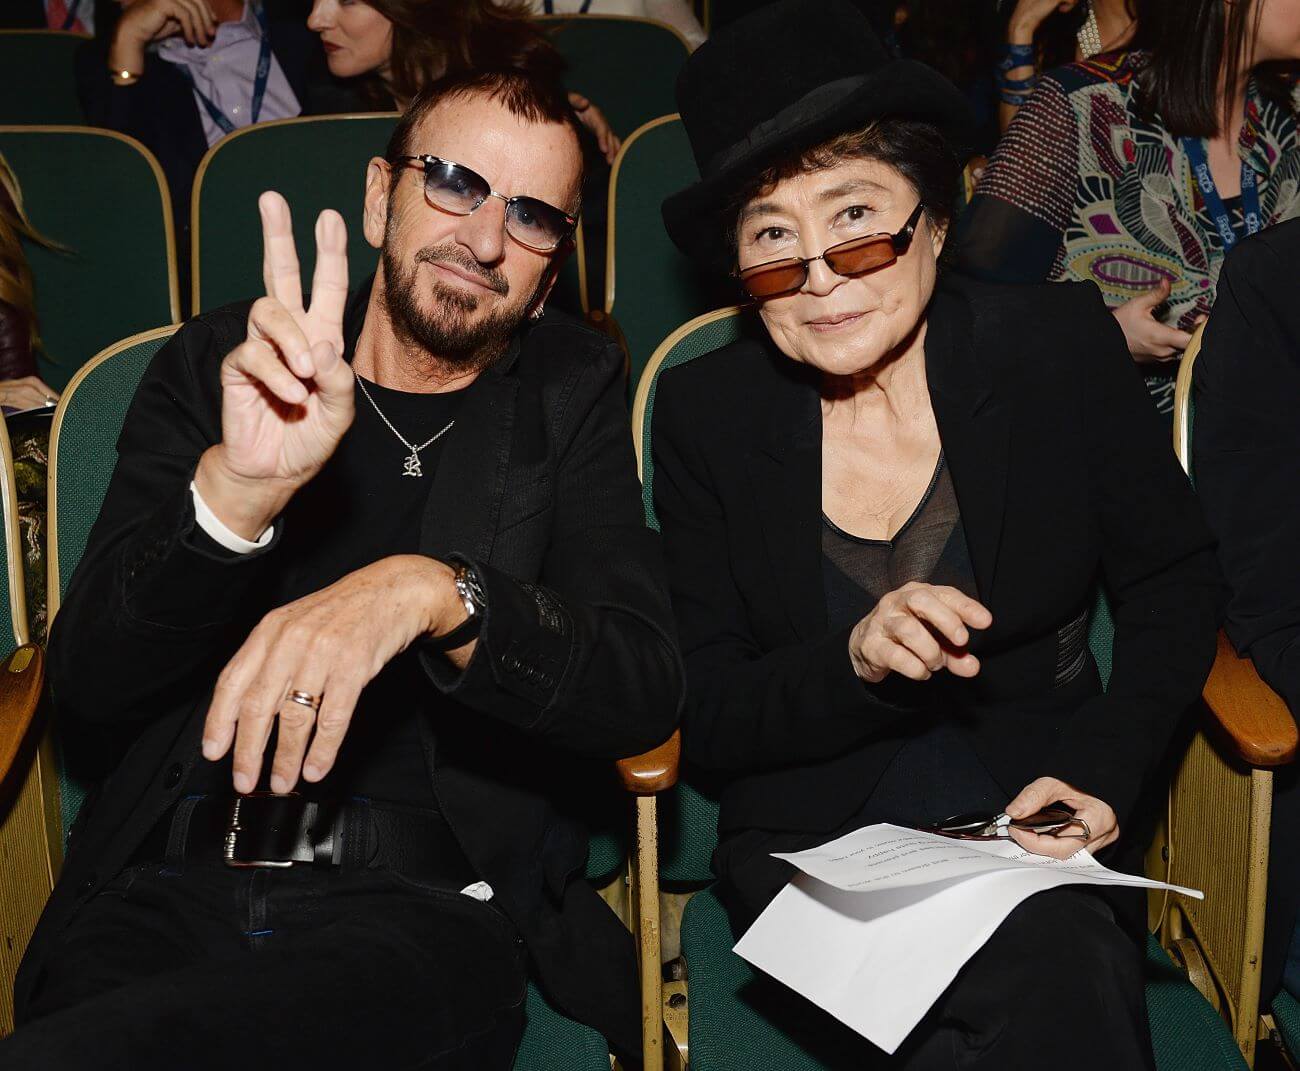 Ringo Starr wears sunglasses and holds up a peace sign. He sits next to Yoko Ono, who wears sunglasses and a black top hat.